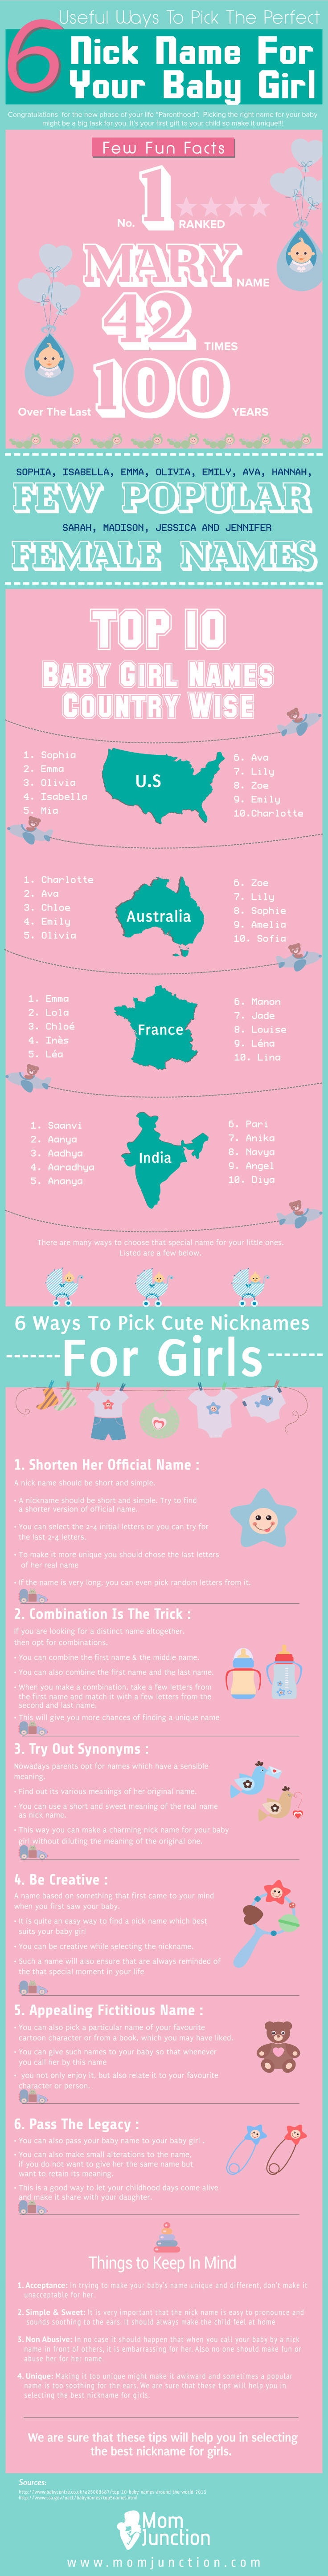 Pick The Perfect Nick Name For Your Baby Girl